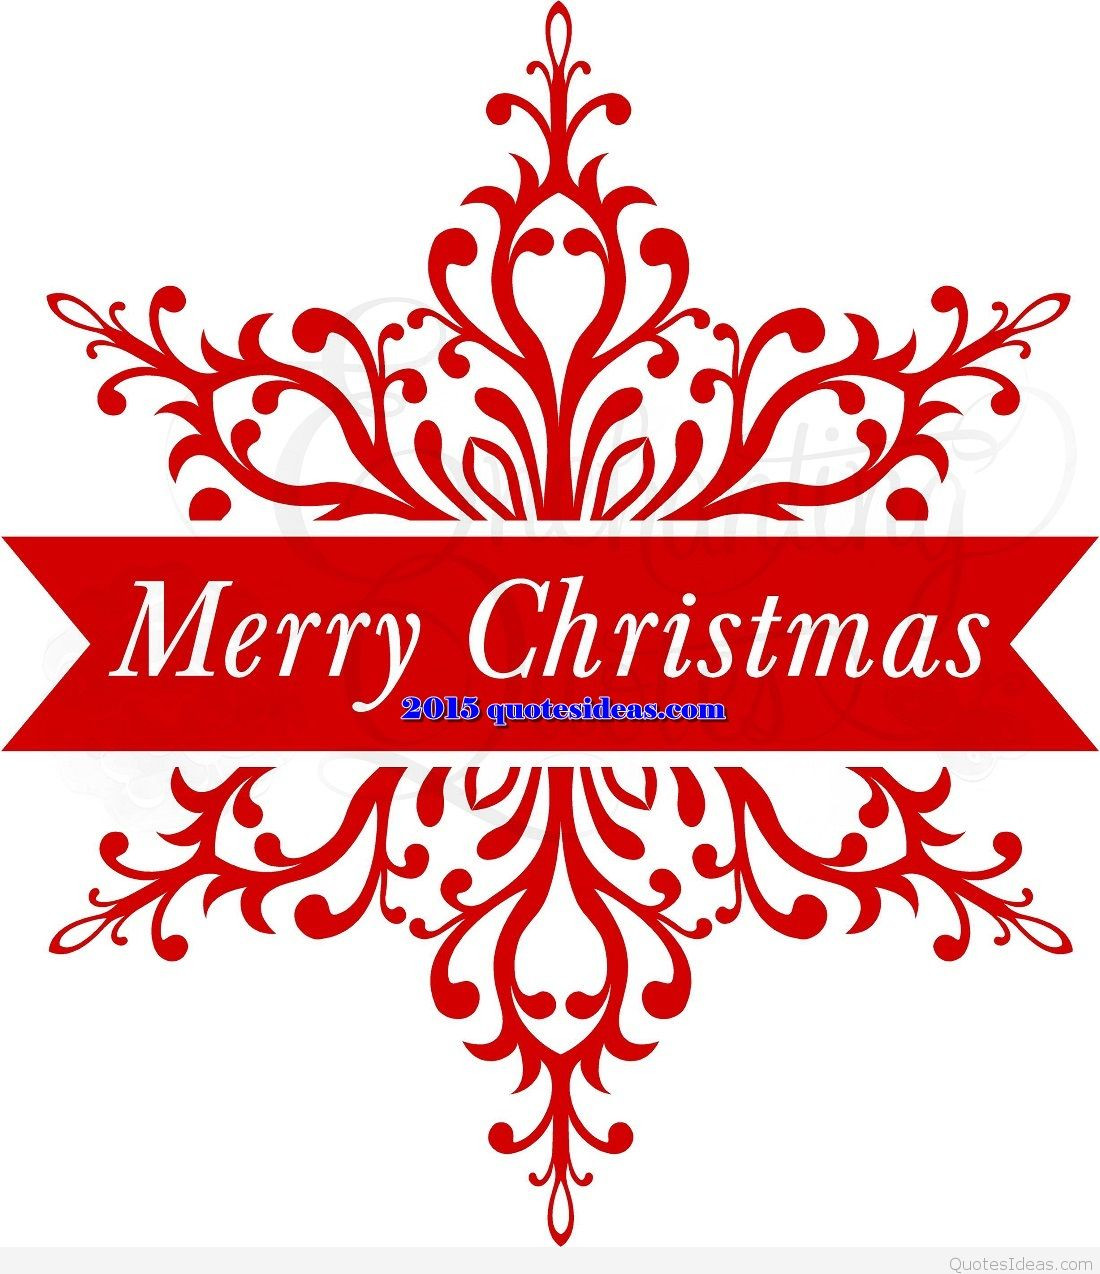 Christmas Pictures And Quotes
 Merry Christmas wishes to all 2015 2016 sayings quotes